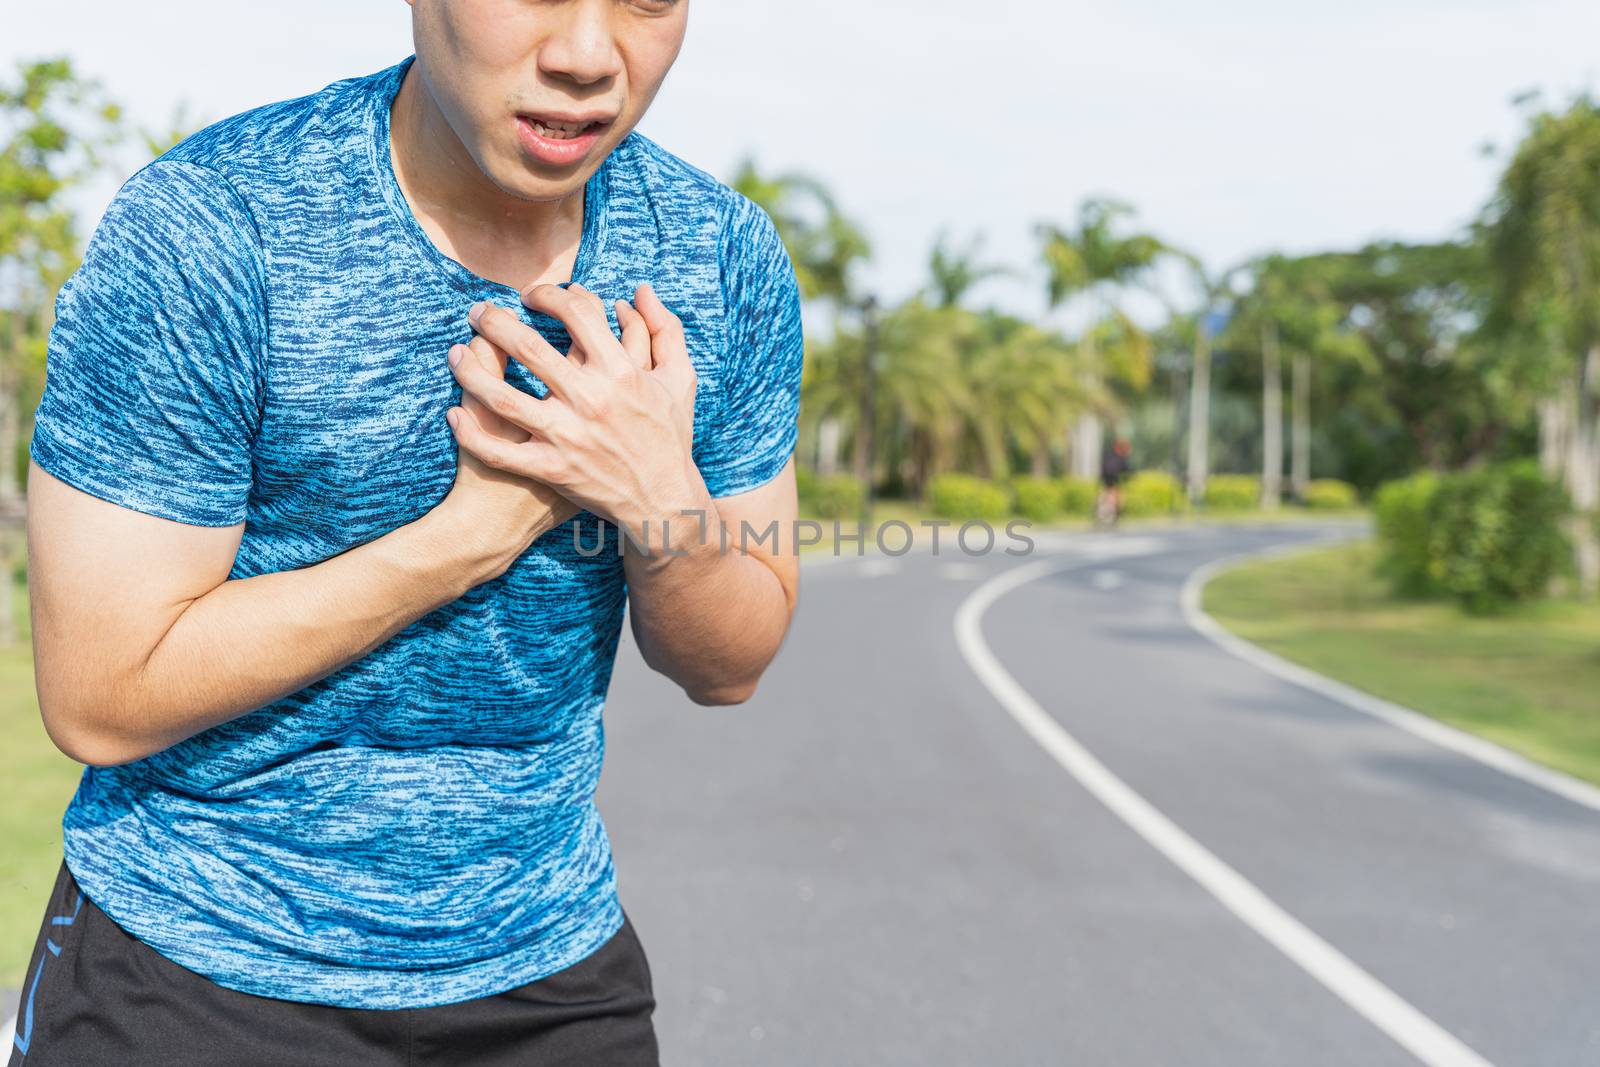 Exhausted male runner suffering painful angina pectoris or asthma breathing problems after running at the park. Sport and healthcare concept.